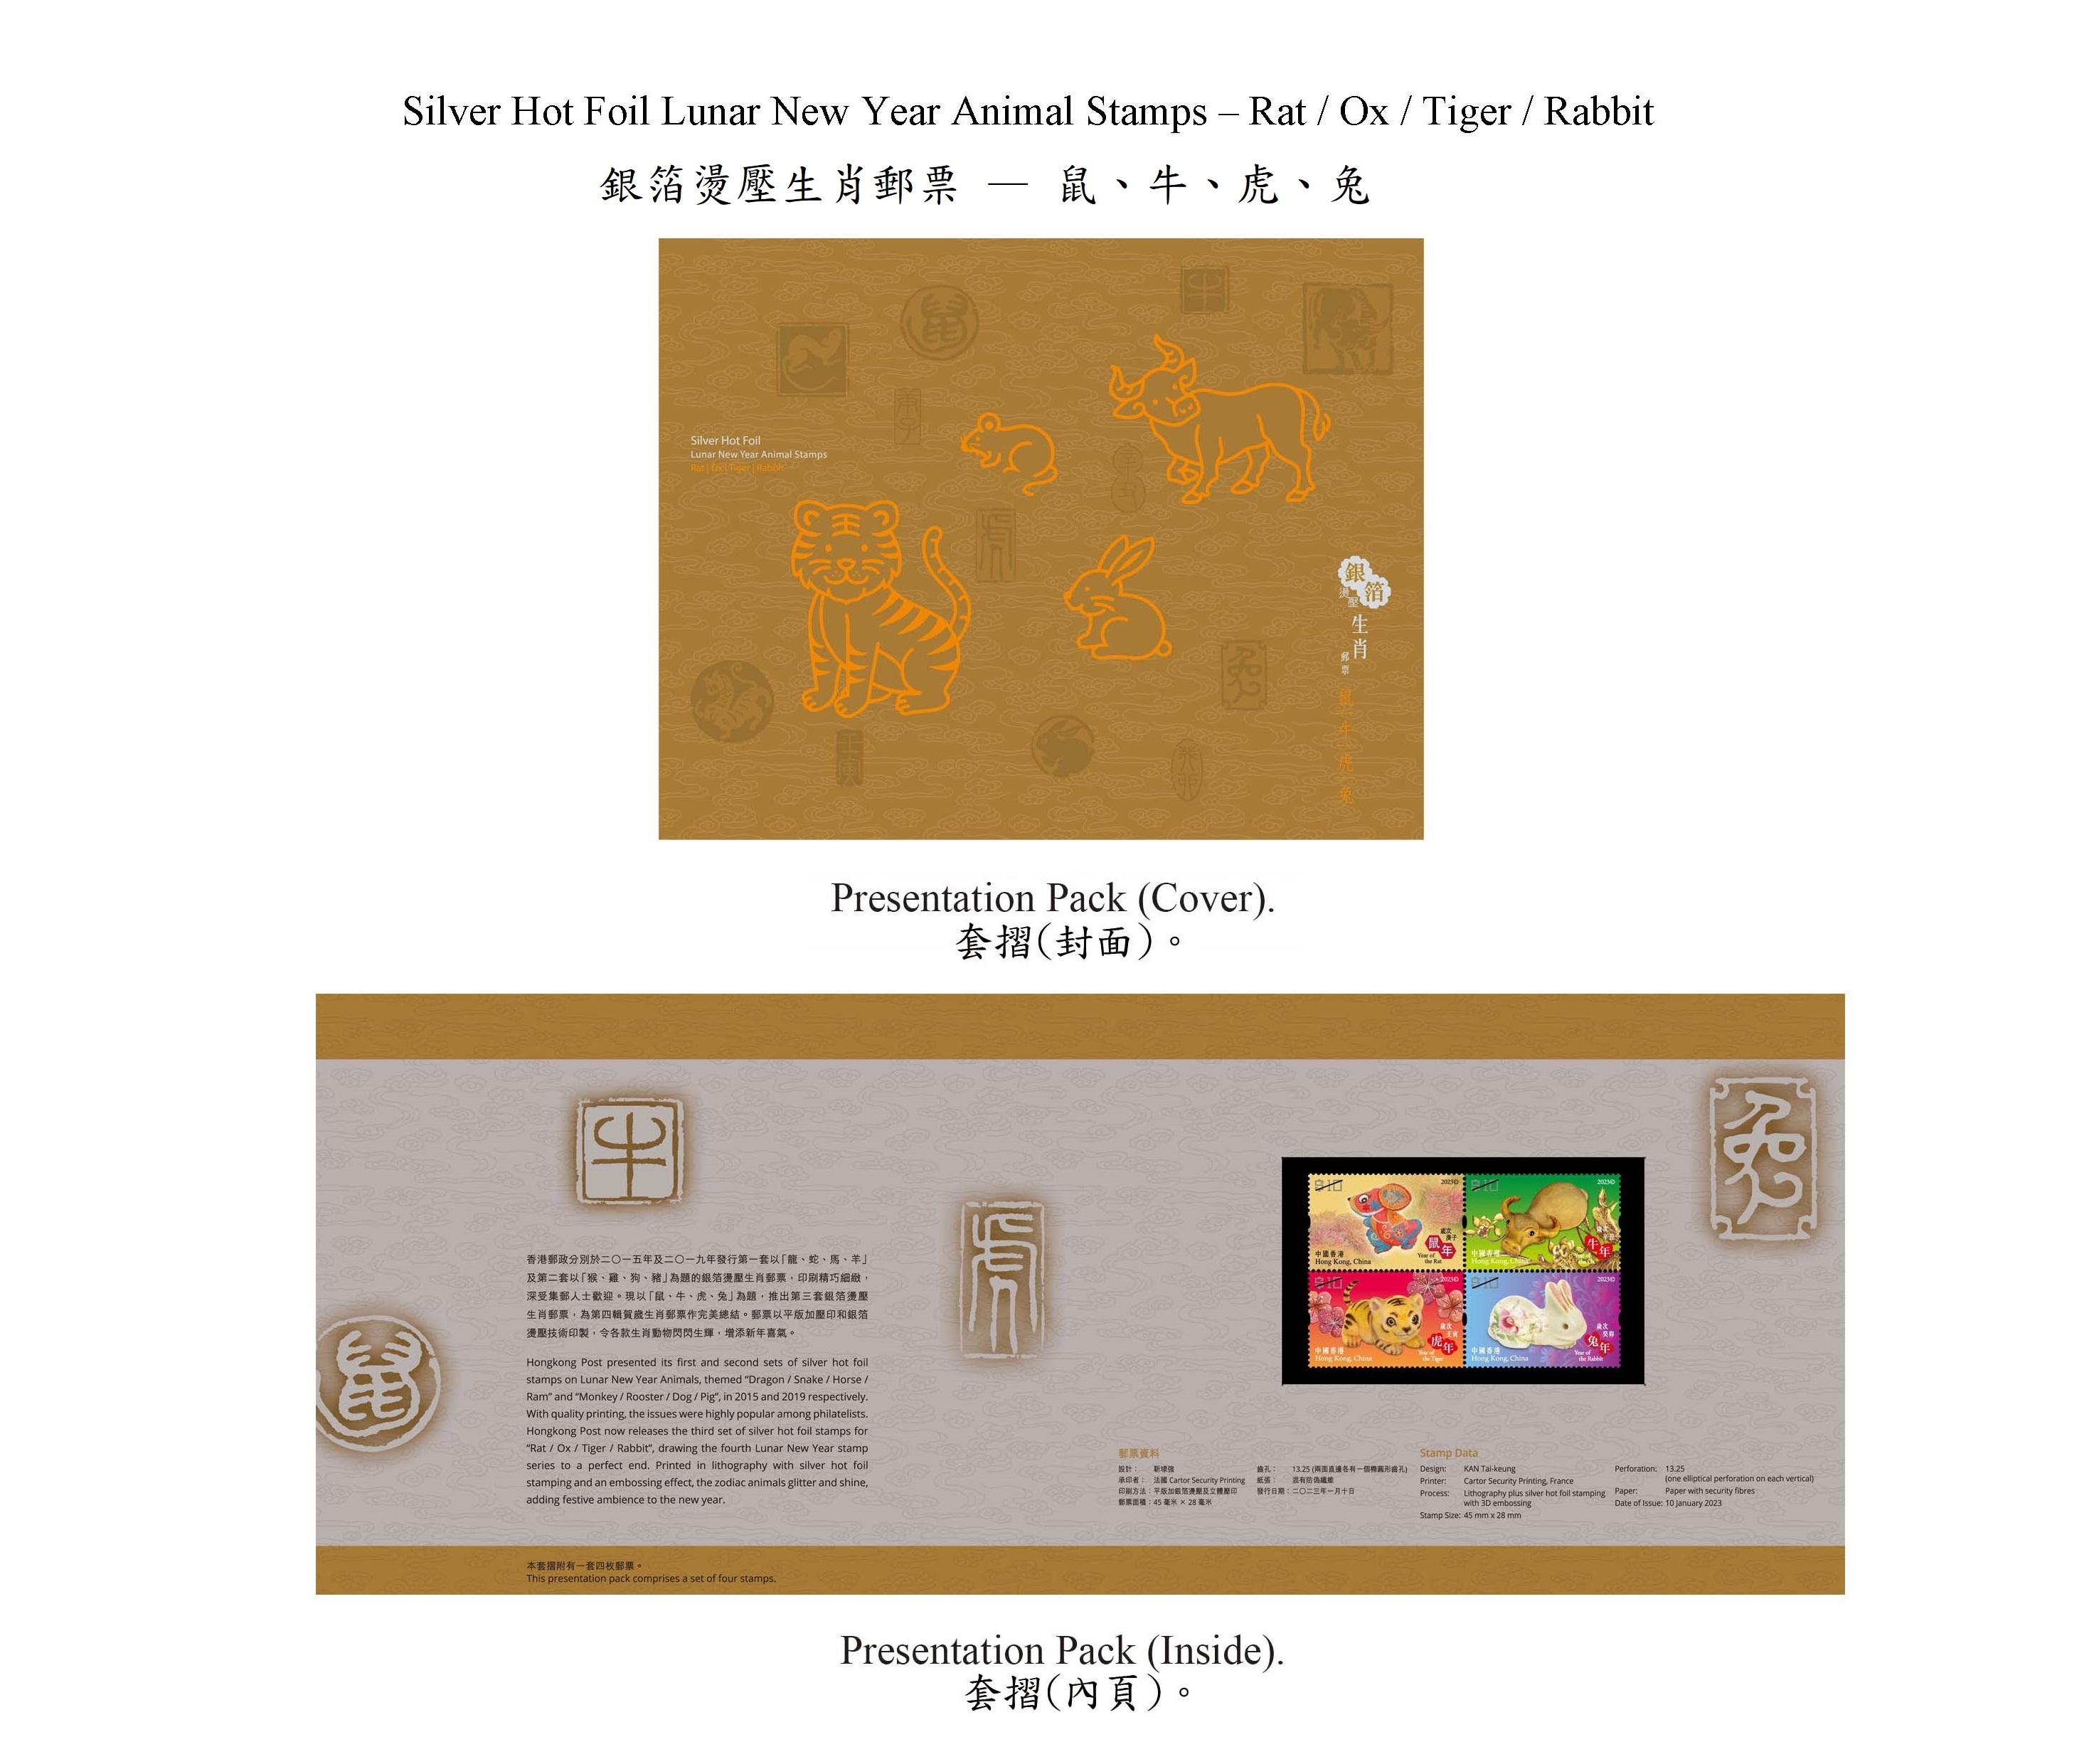 Hongkong Post will launch a special stamp issue and associated philatelic products with the theme "Year of the Rabbit" on January 10, 2023 (Tuesday). The "Silver Hot Foil Lunar New Year Animal Stamps - Rat/Ox/Tiger/Rabbit" will also be launched on the same day. Photo shows the presentation pack.
